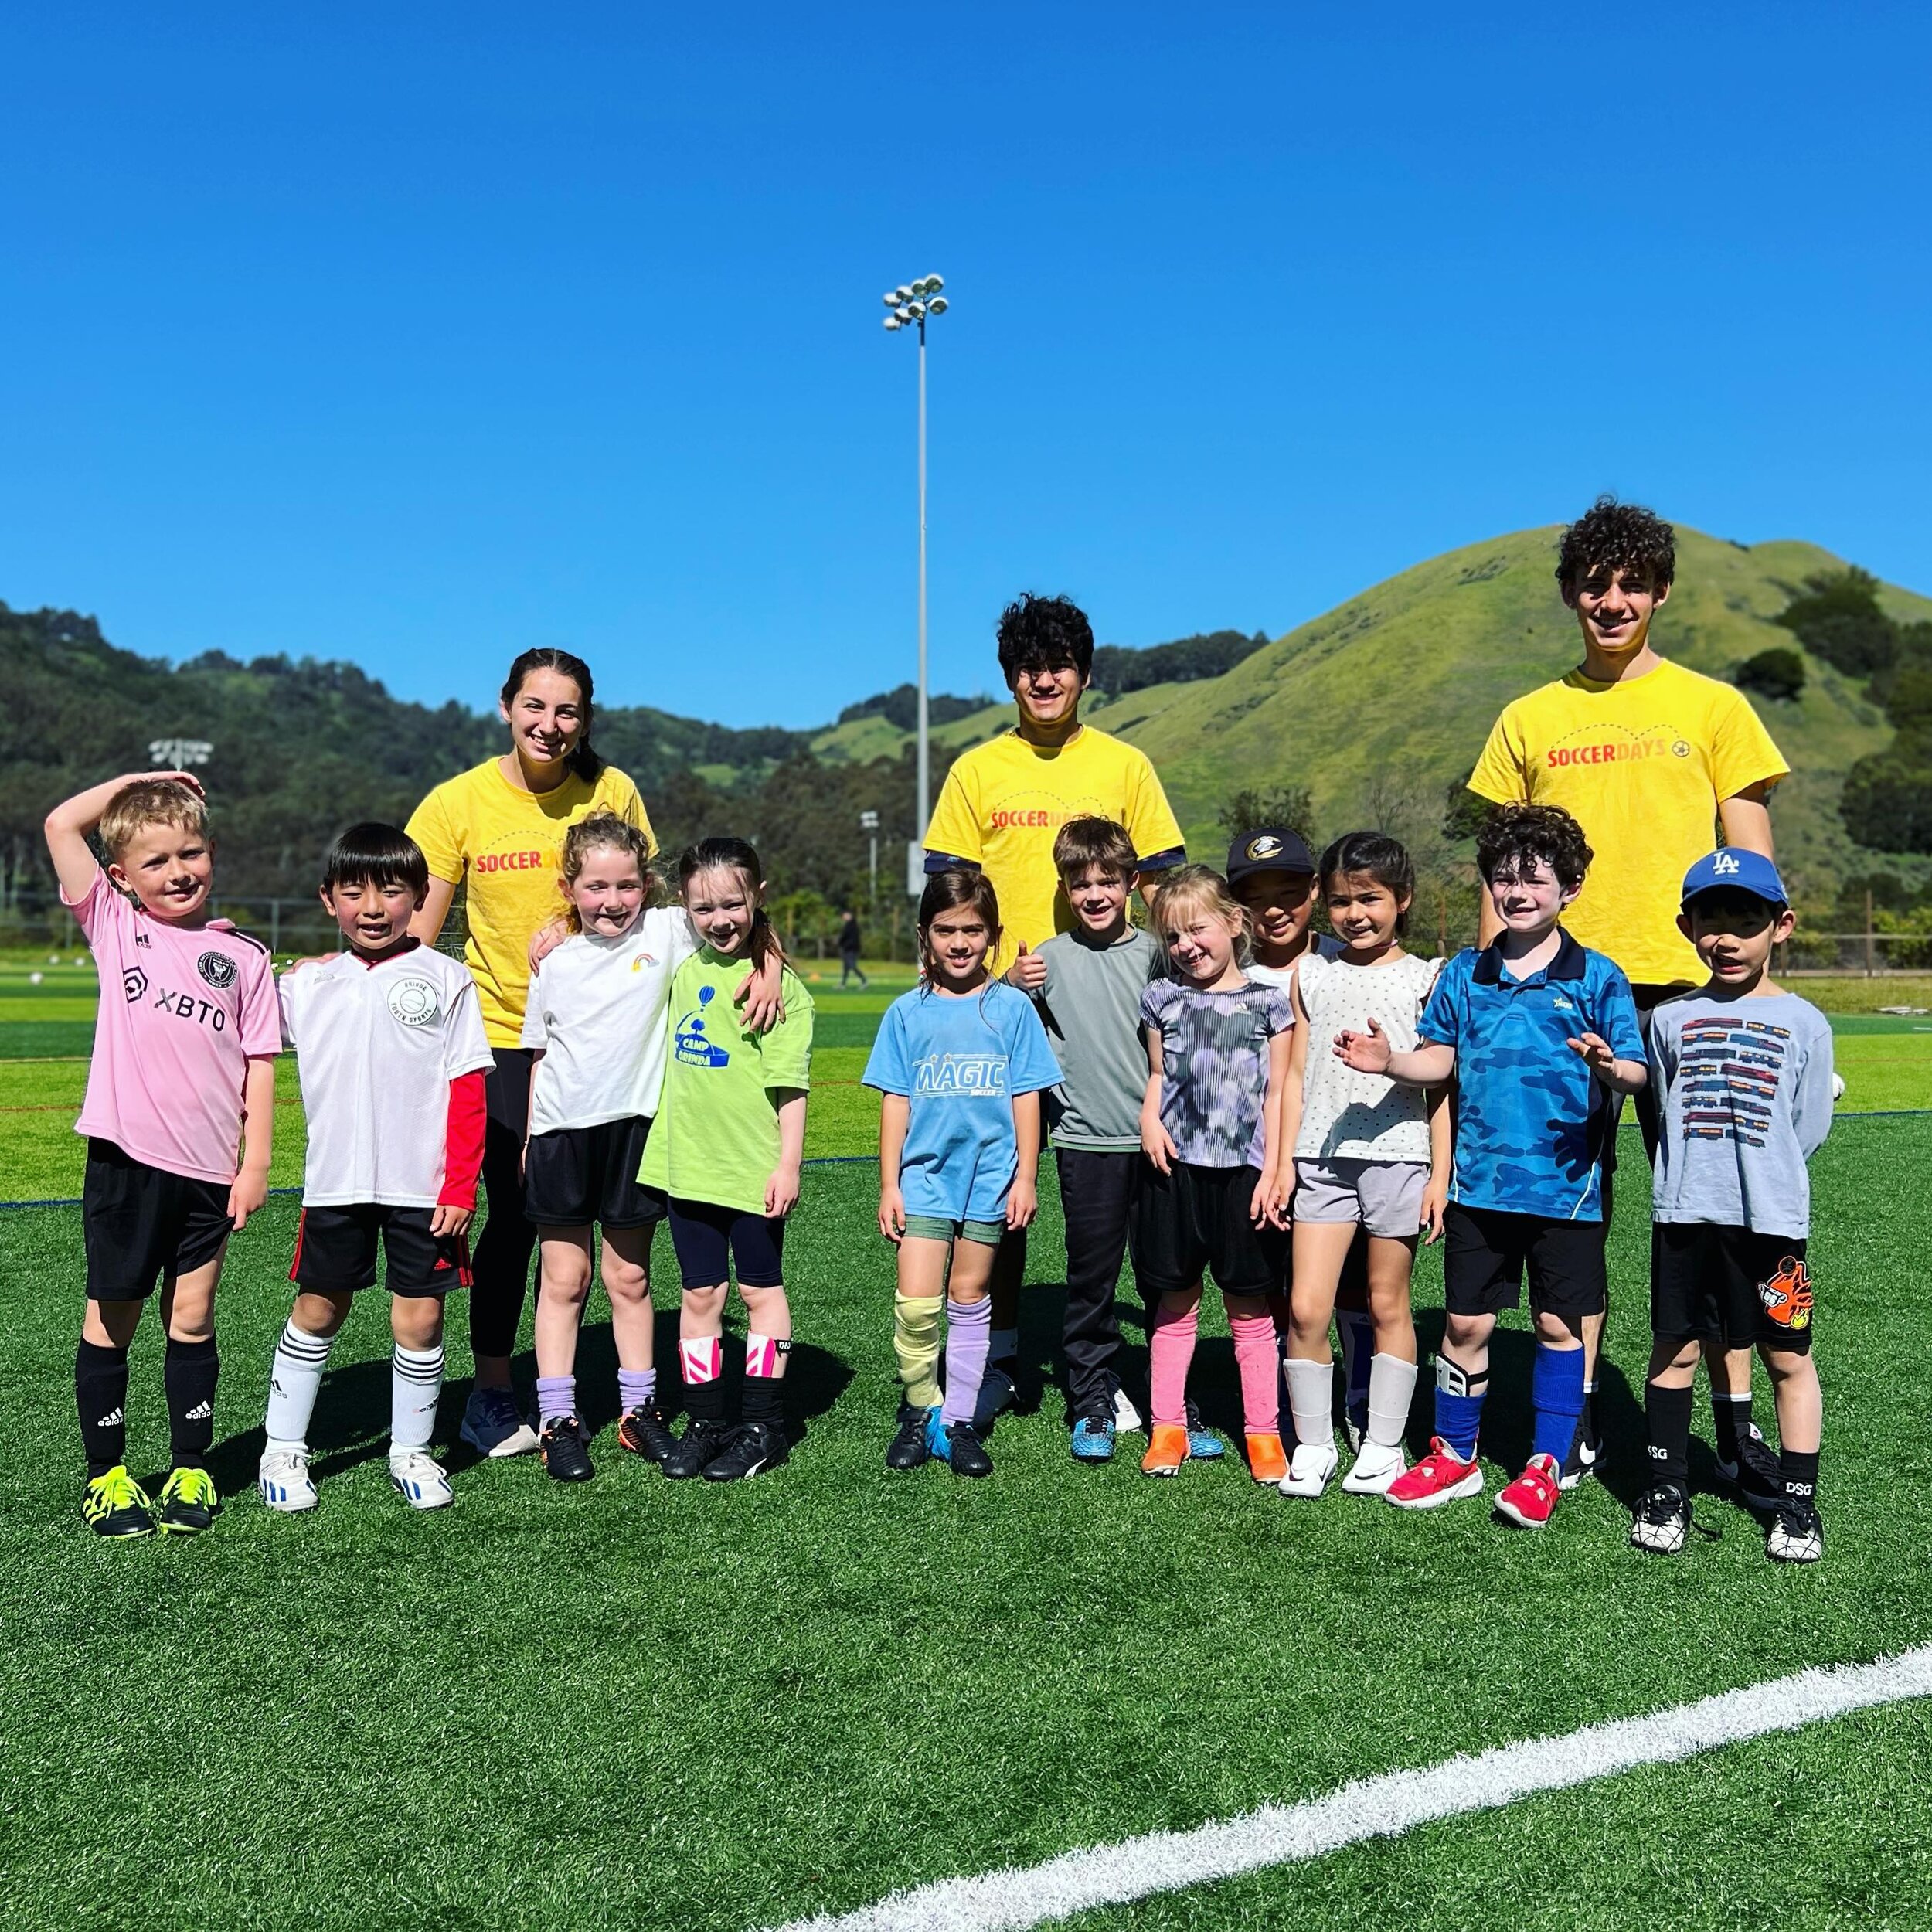 Spring Break Soccer Camp 2024! For girls and boys ages 5-12 years old at any skill level. Single day registration available as the week goes on. Visit SoccerDays.com for more info.